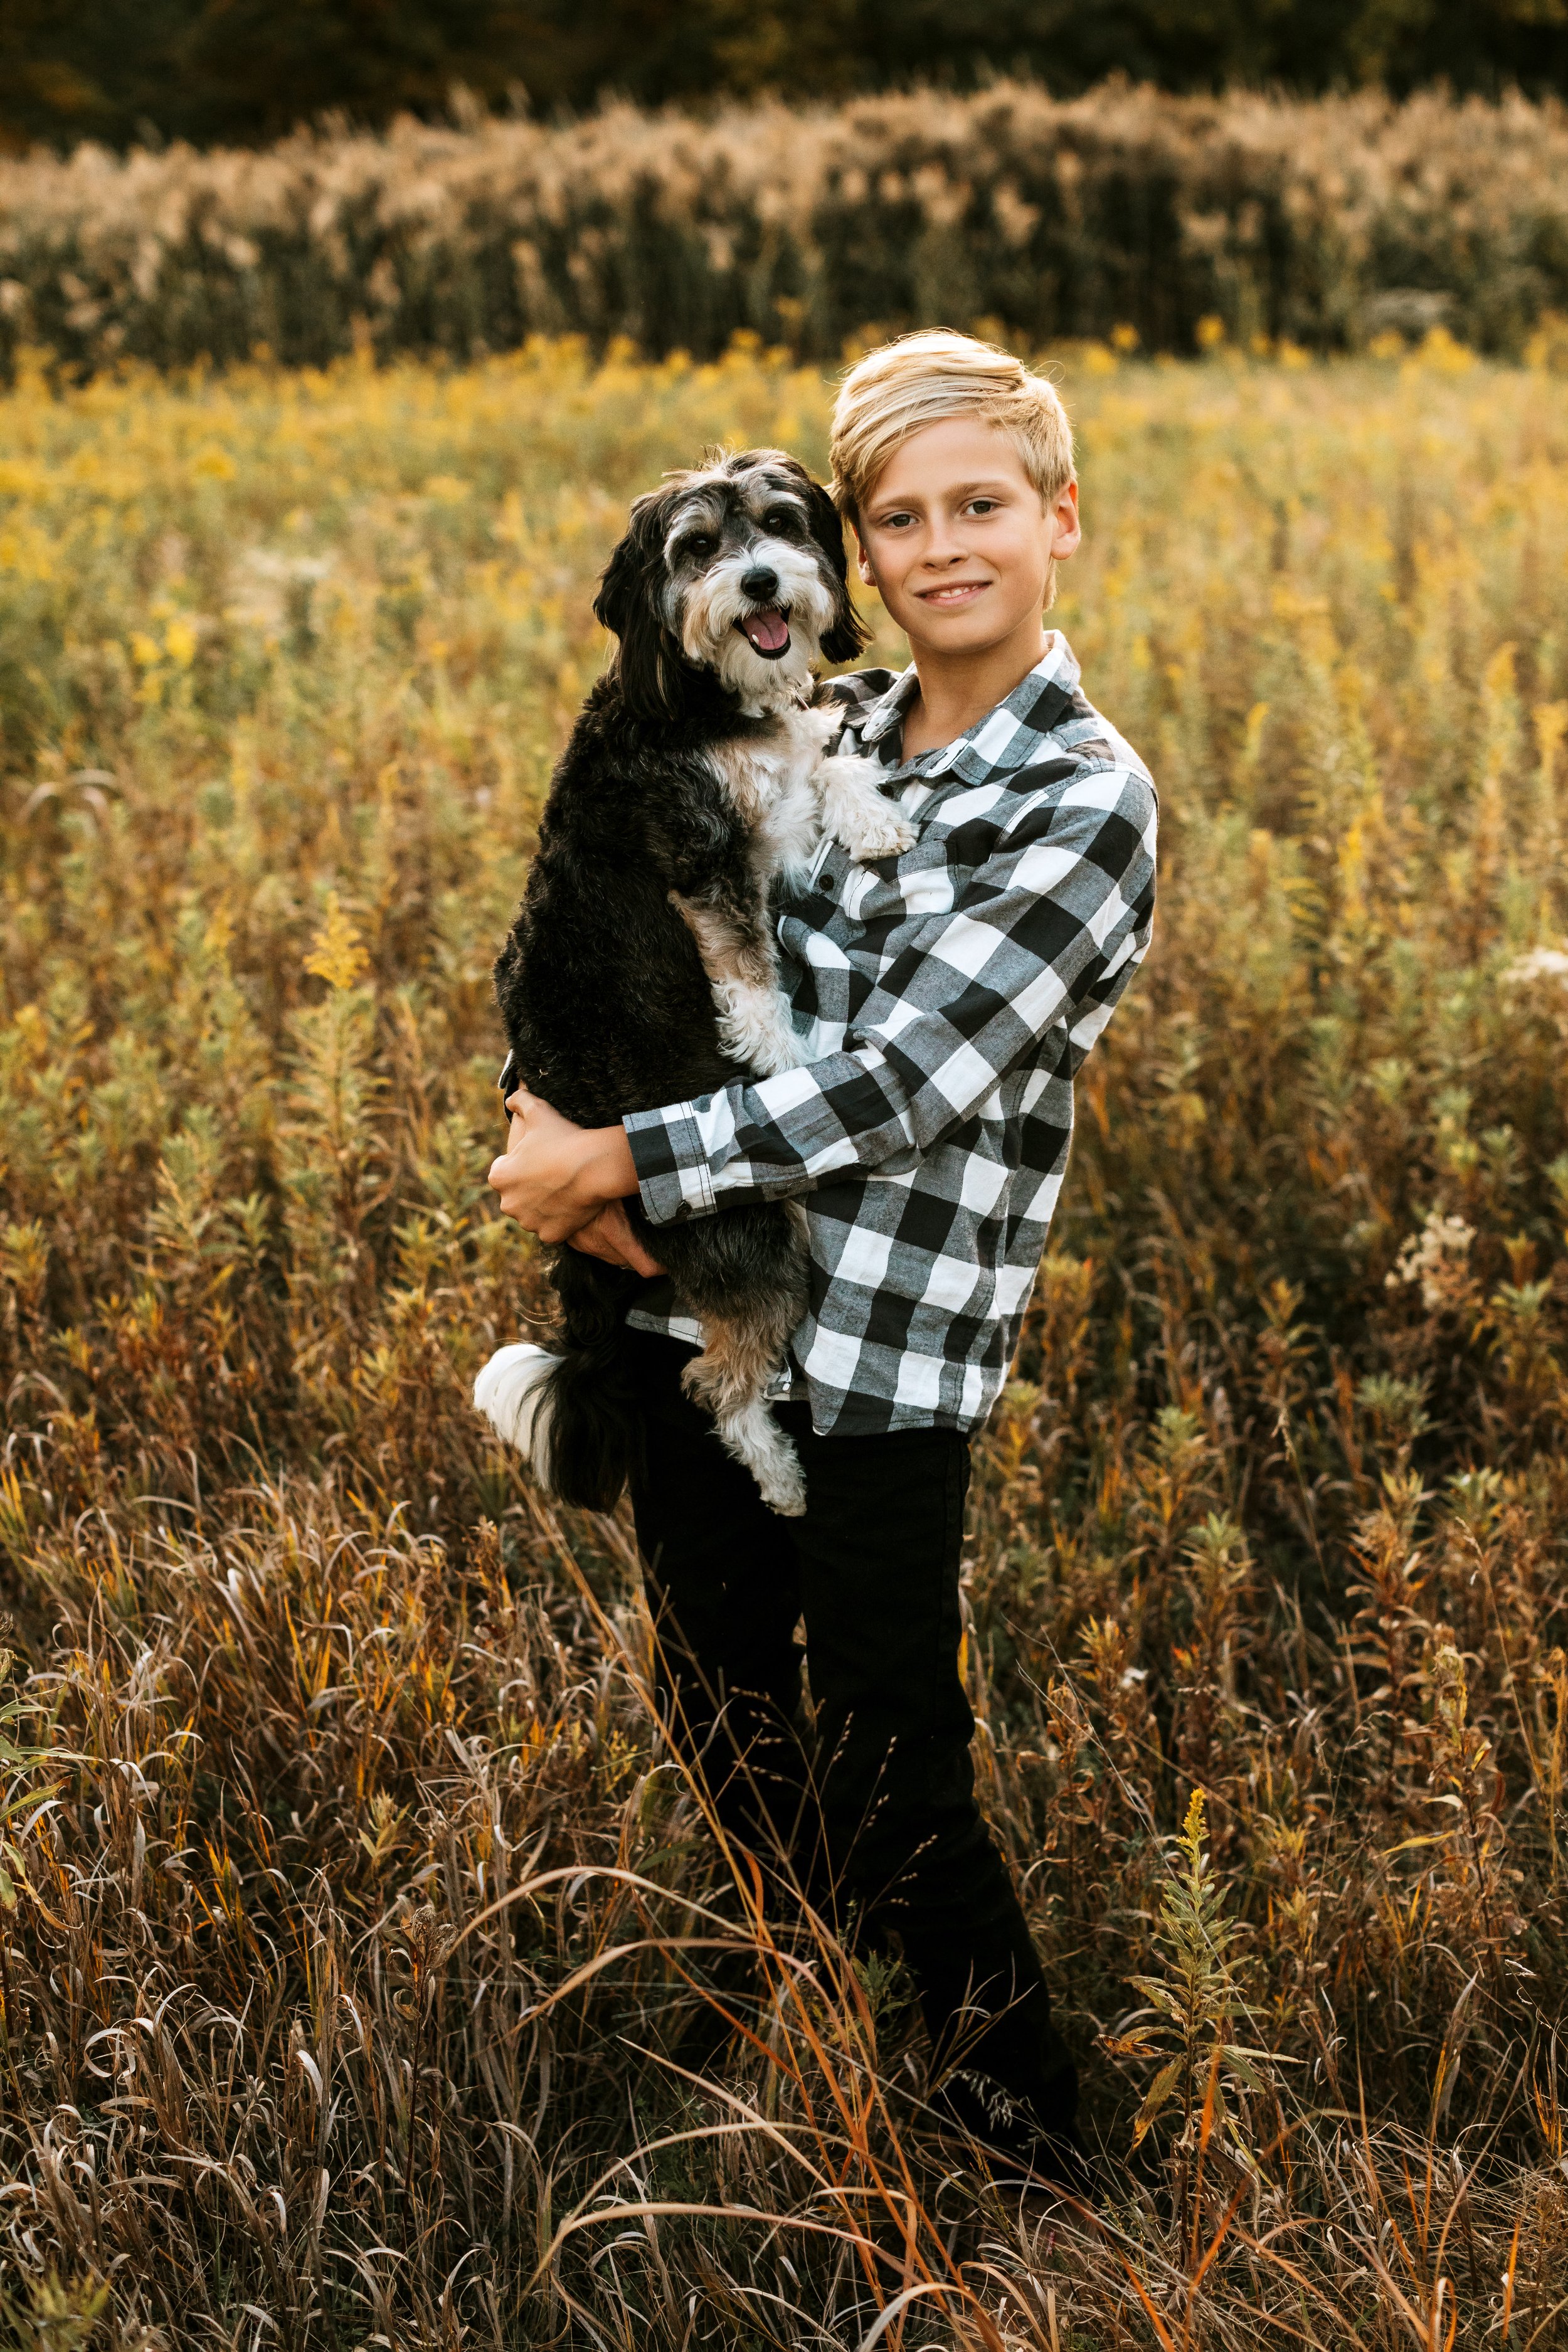  Teala Ward Photography captures a boy holding his beloved dog in a grass field at sunset. boy and dog boys best friend #TealaWardPhotography #TealaWardFamilies #IllinoisValleyfamilypics #fursibiling #Illinoisfamilyphotography #brother&amp;sister 